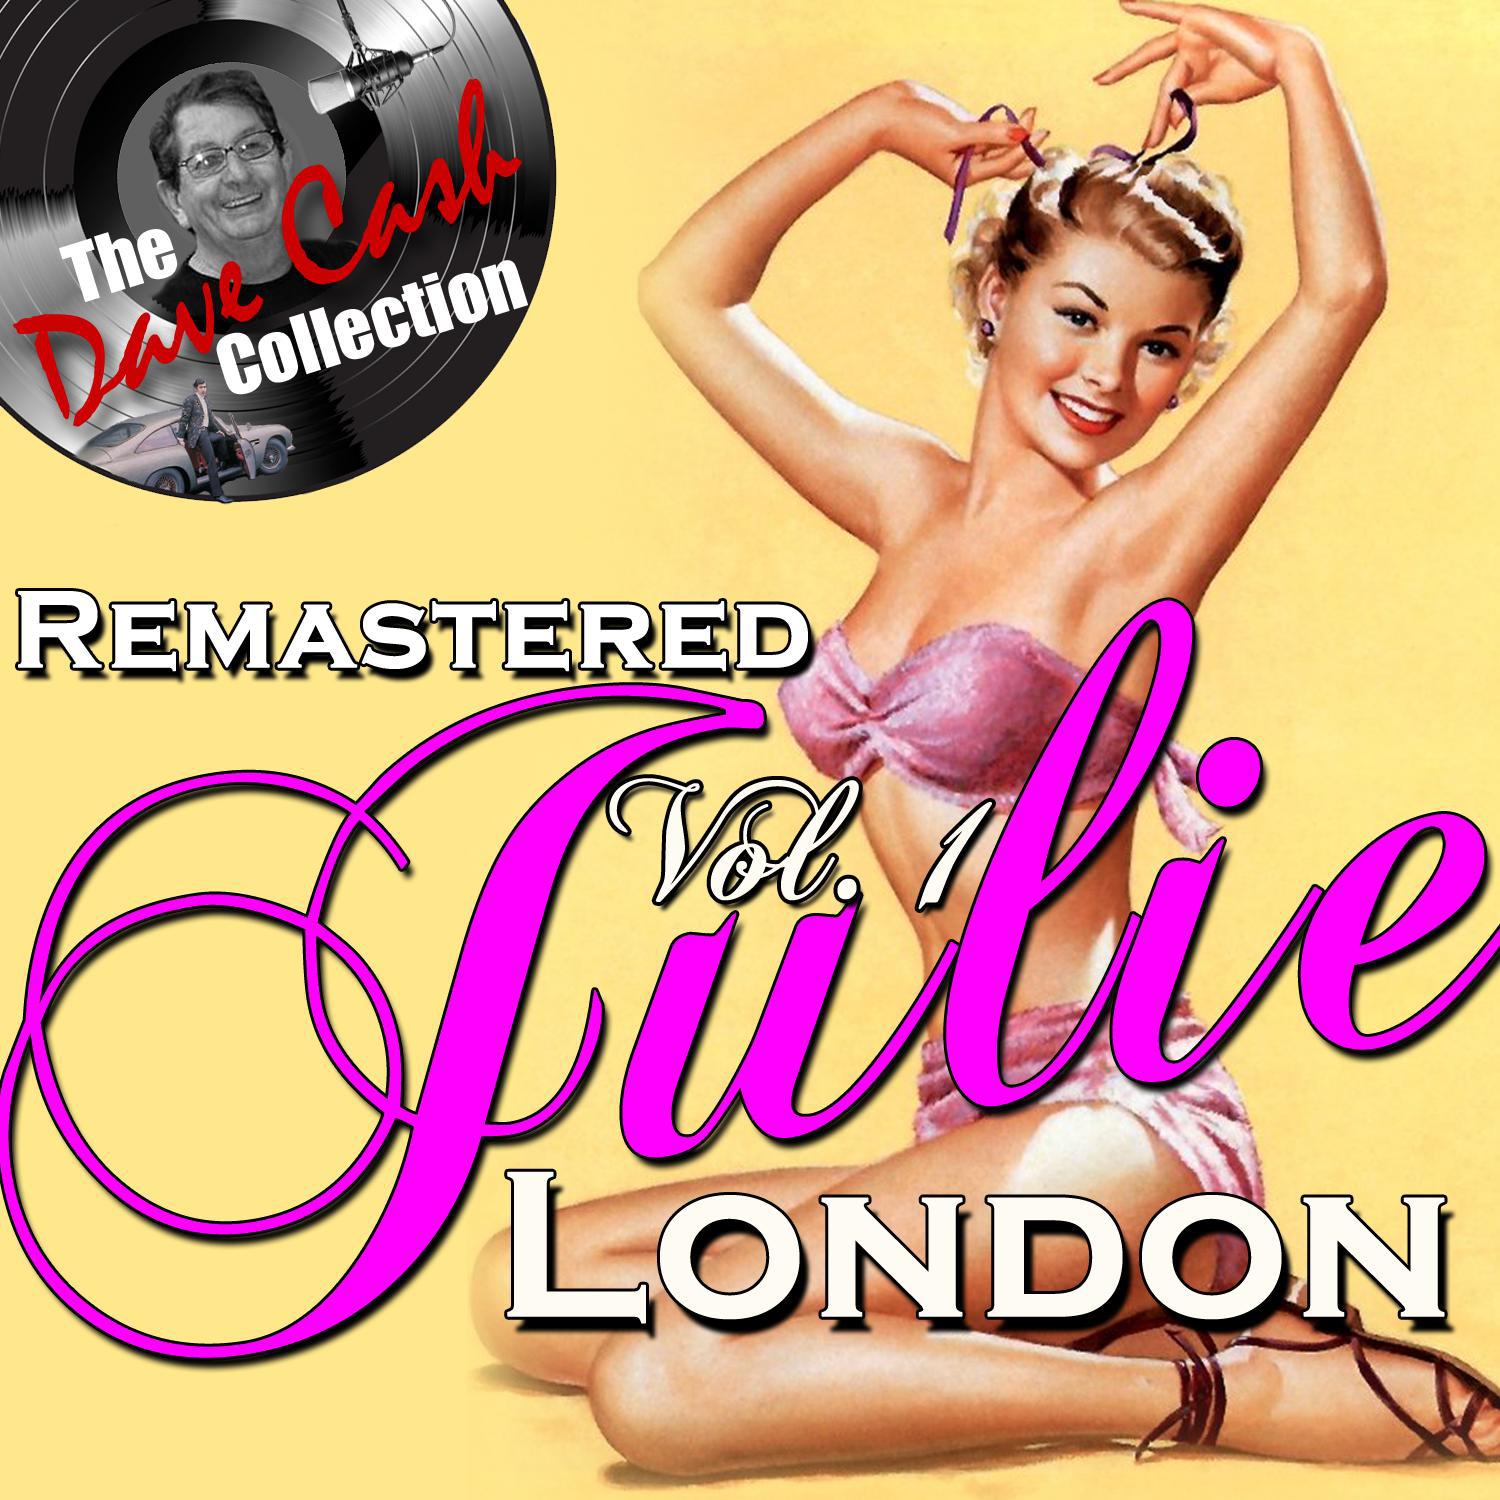 Remastered London, Vol. 1 (The Dave Cash Collection)